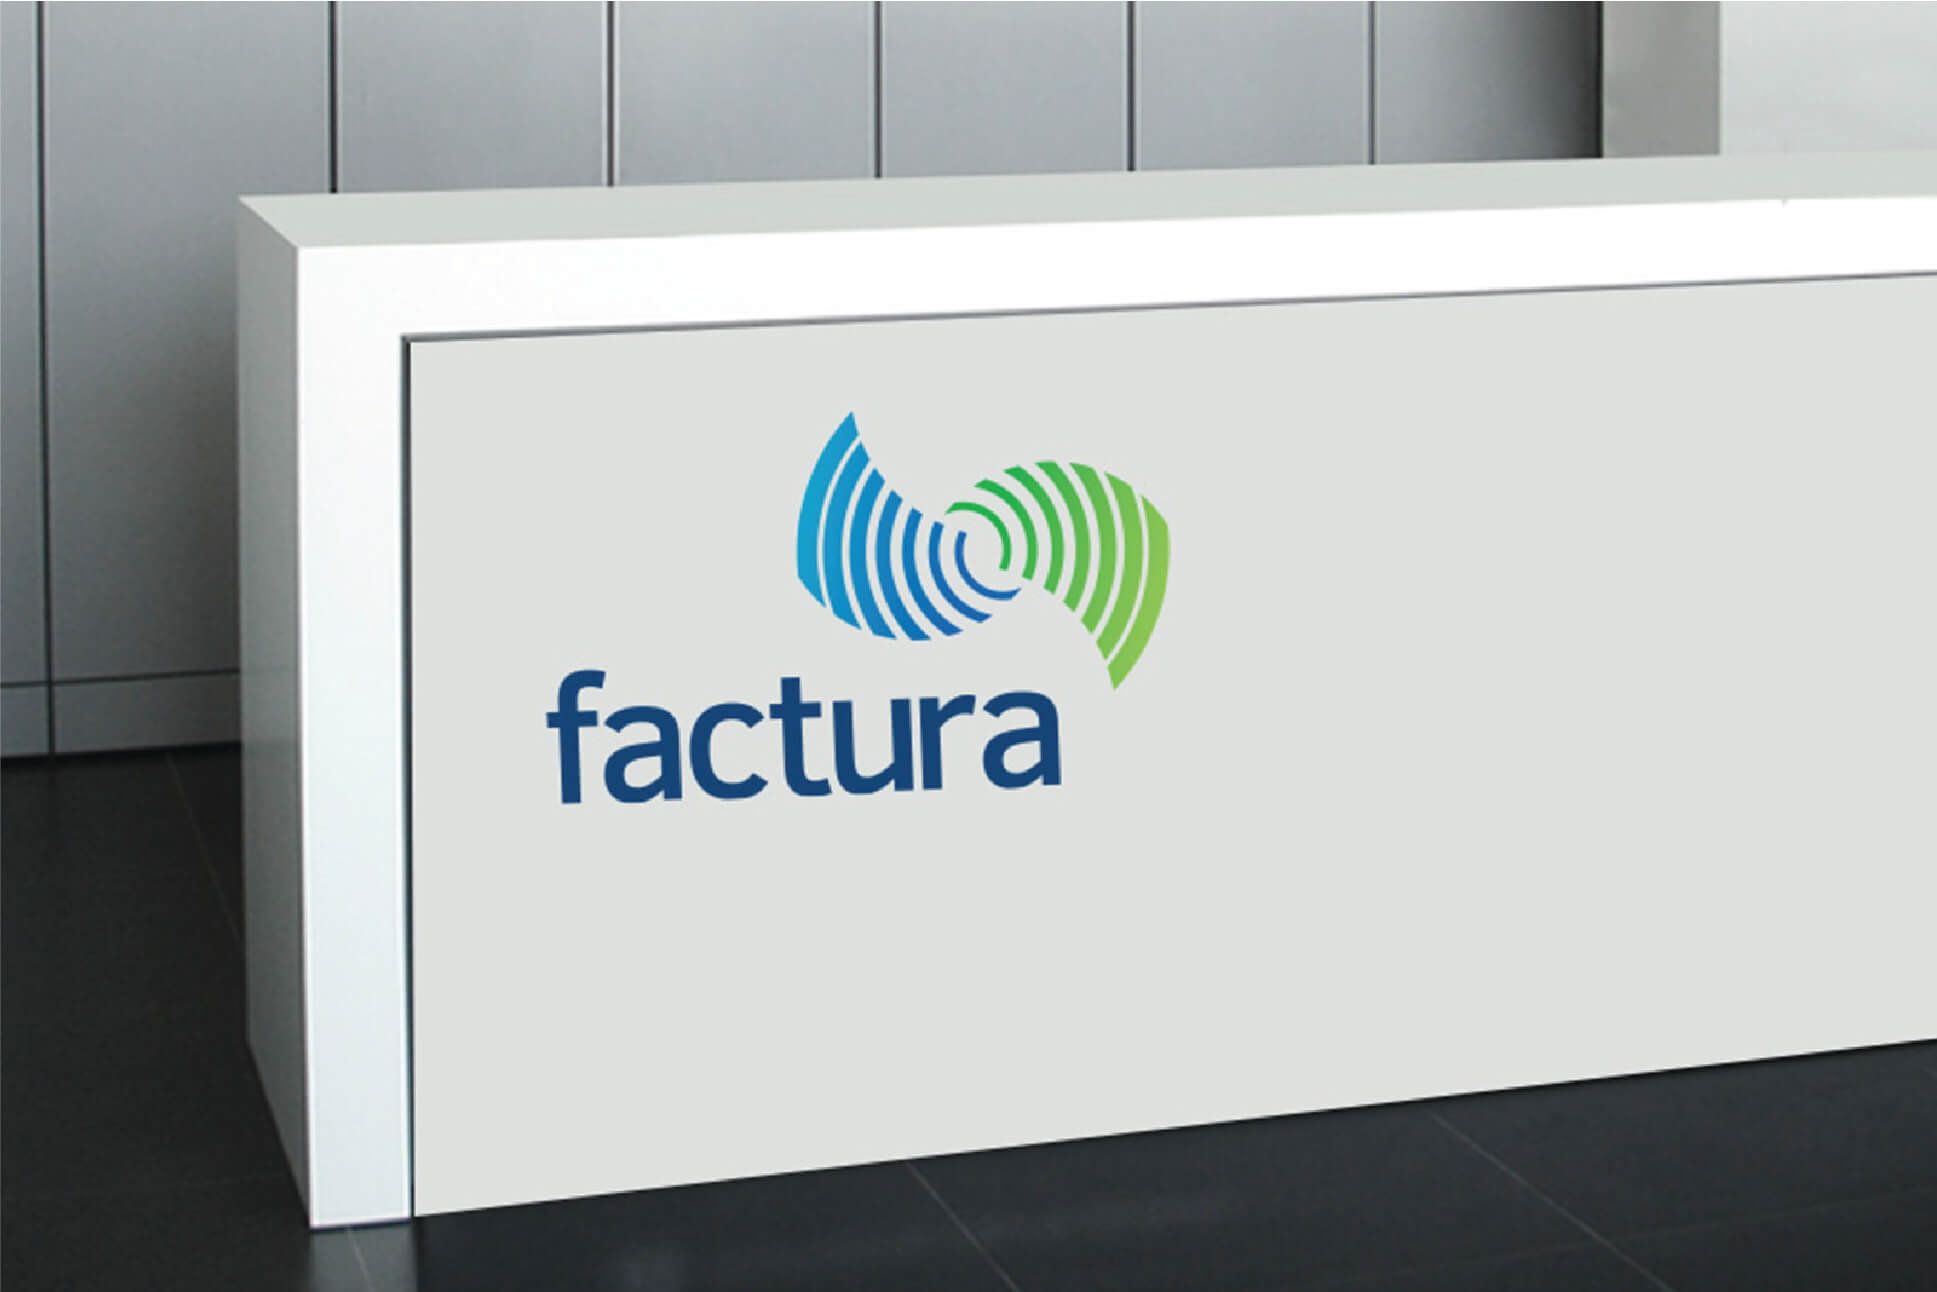 Application of the Brand Design for Factura